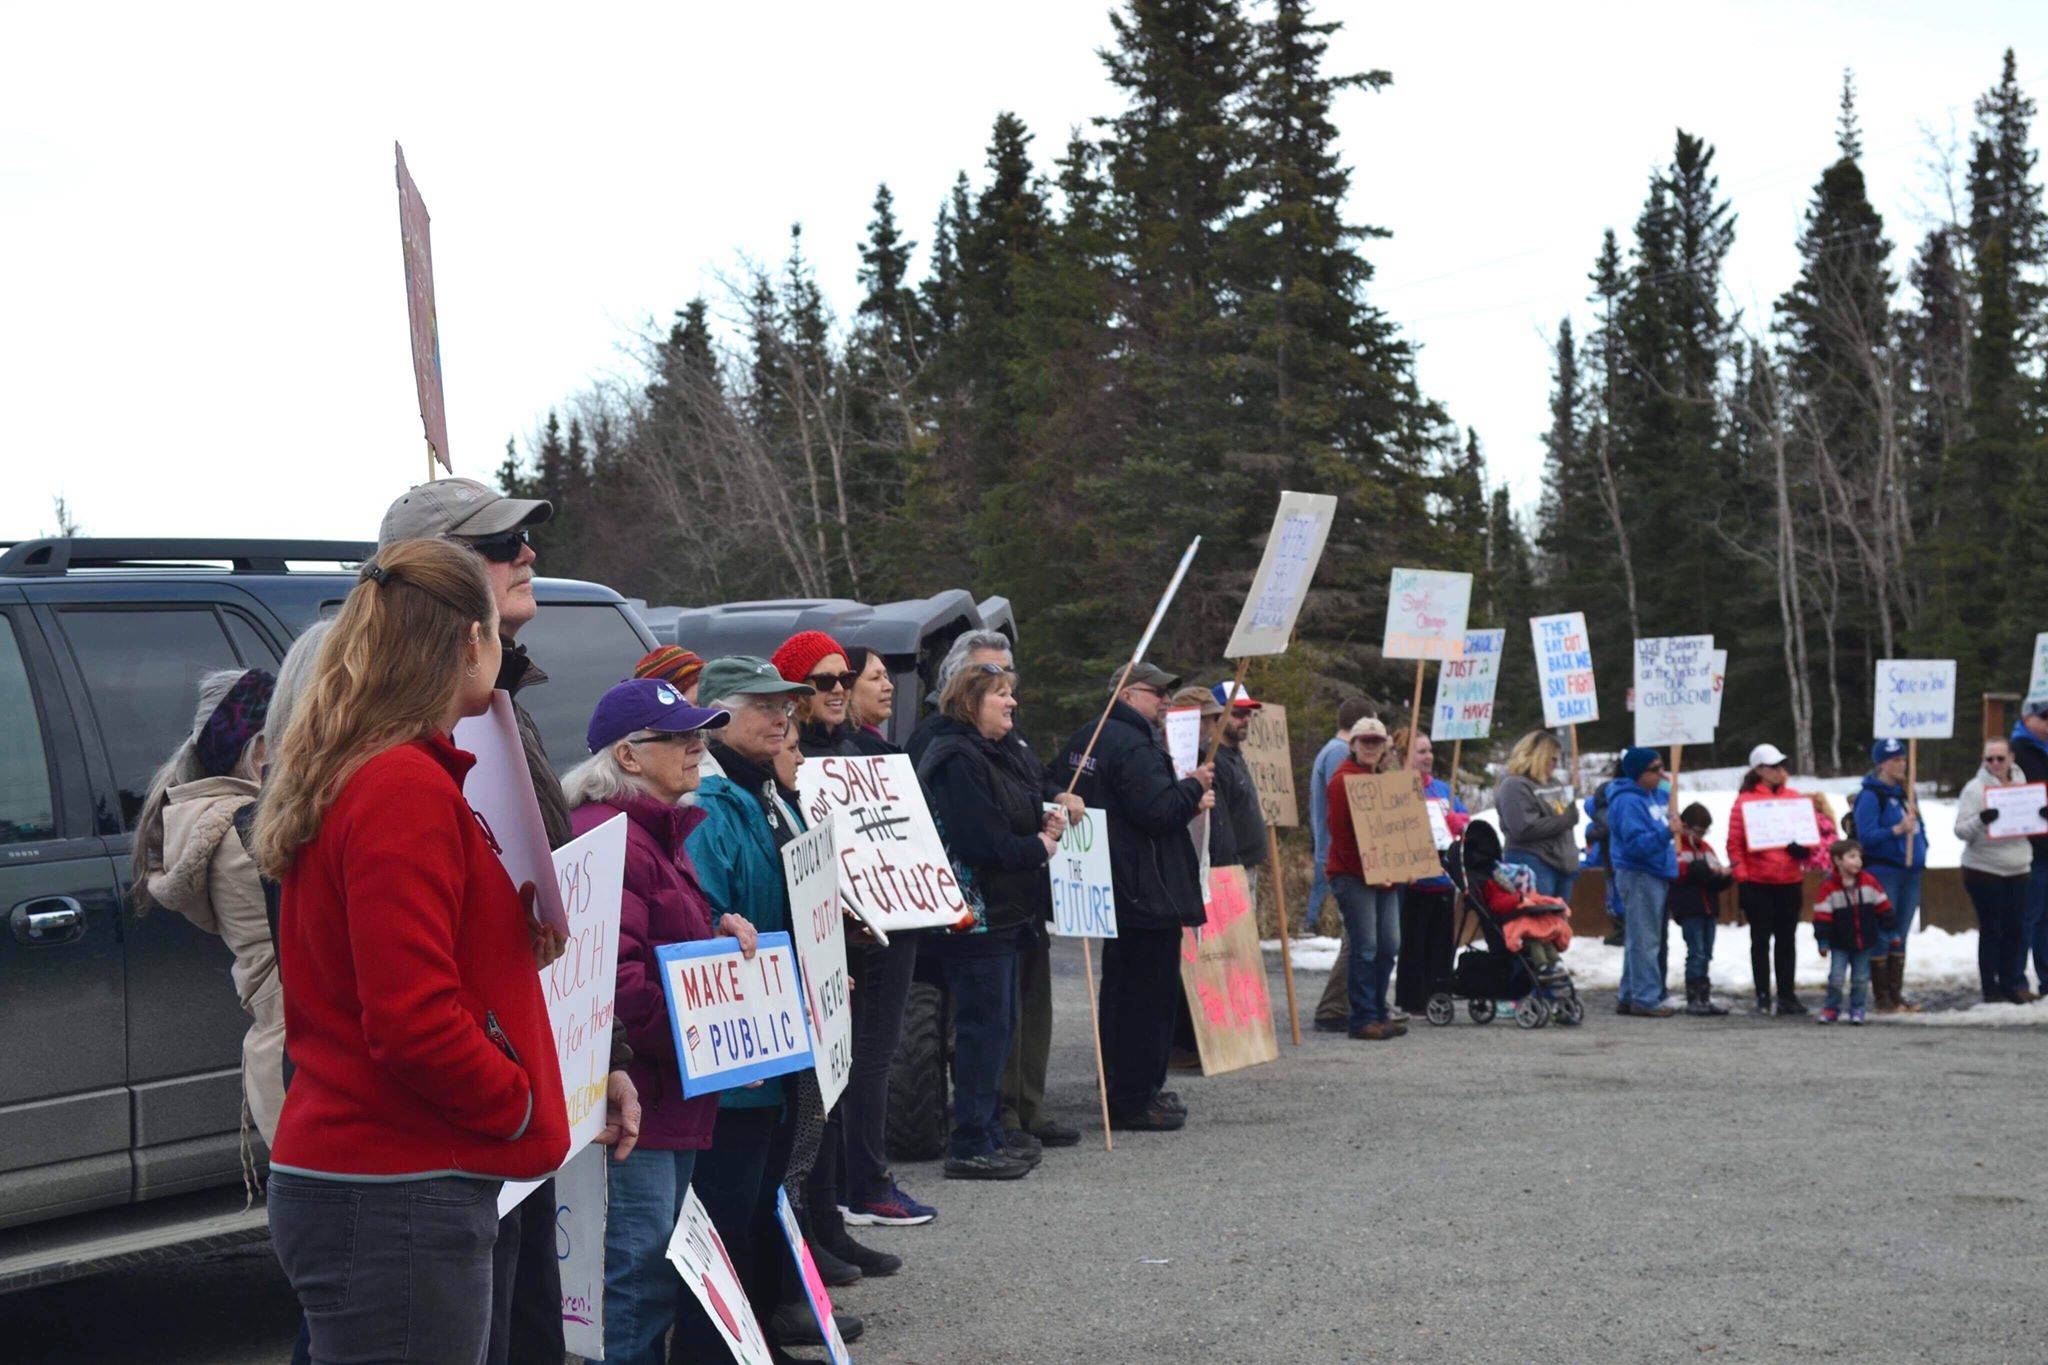 Protesters stand outside the Cannery Lodge in Kenai, Alaska, ahead of Gov. Mike Dunleavy’s presentation about his proposed budget on March 26, 2019. (Photo by Victoria Petersen/Peninsula Clarion)